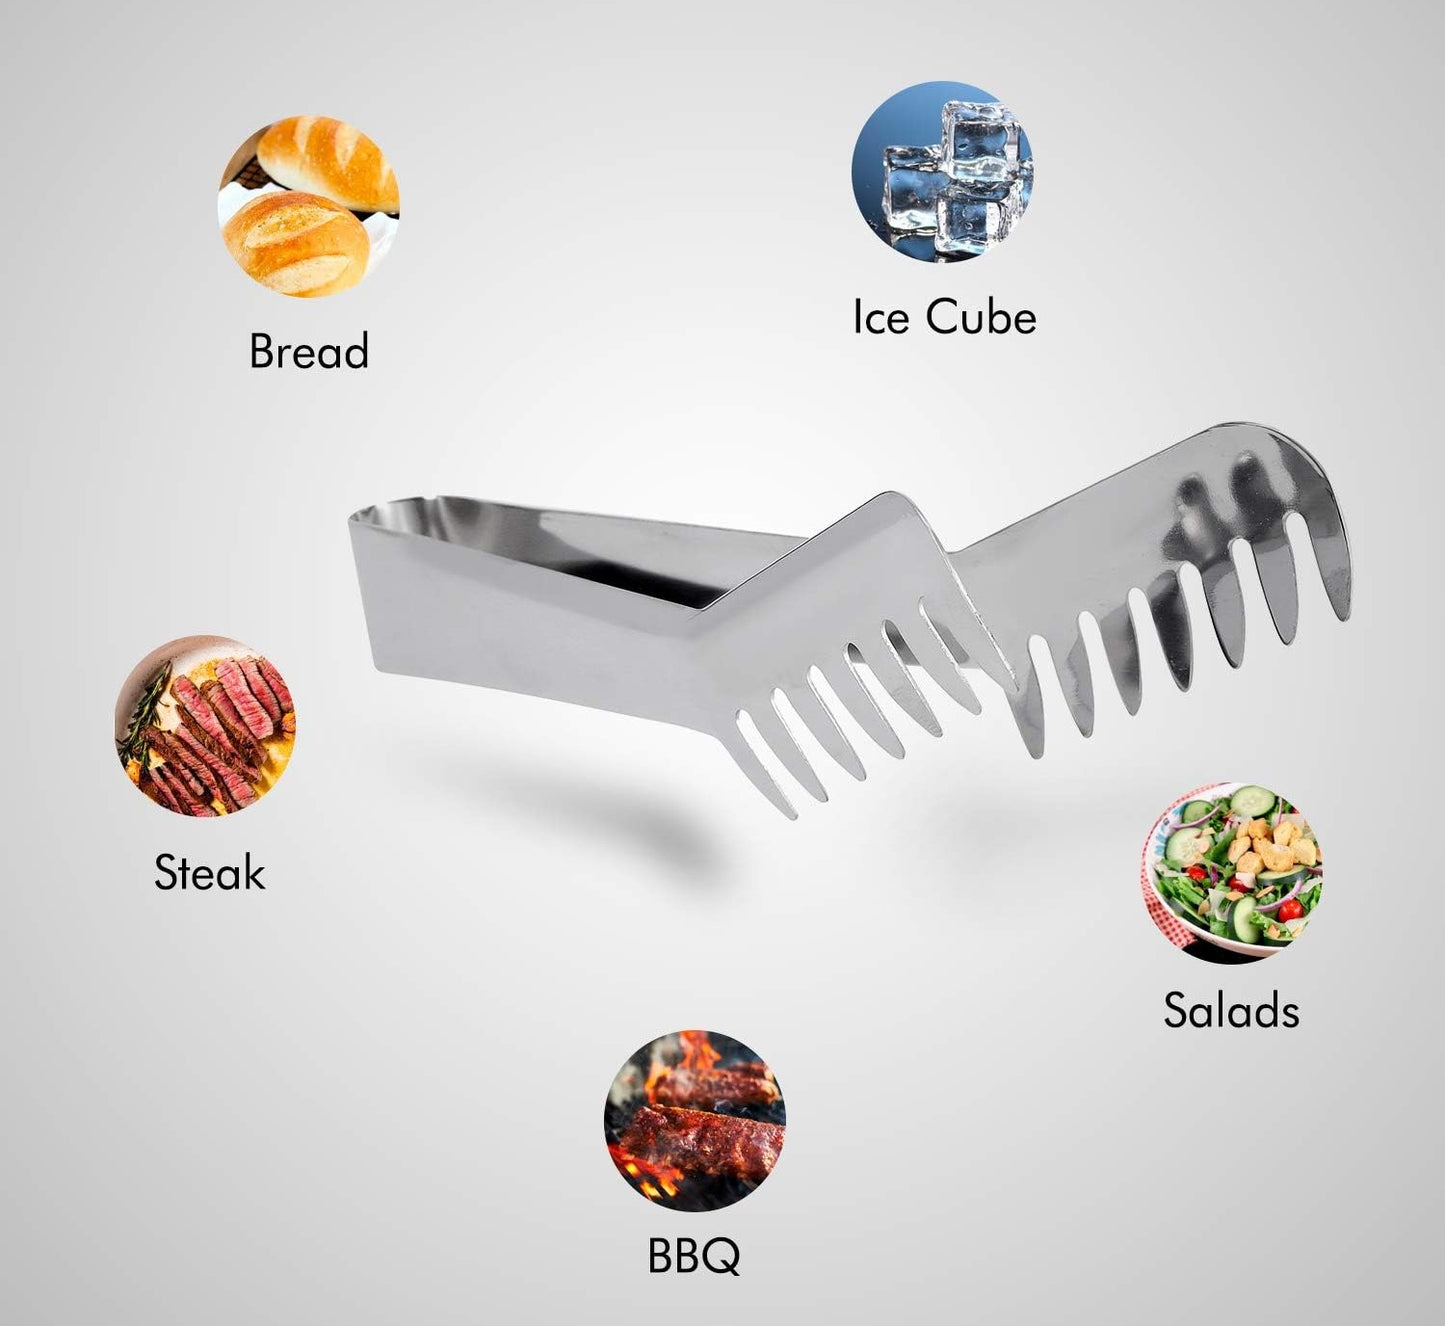 Stainless Steel Food Comb Clip Kitchen Spaghetti Tool